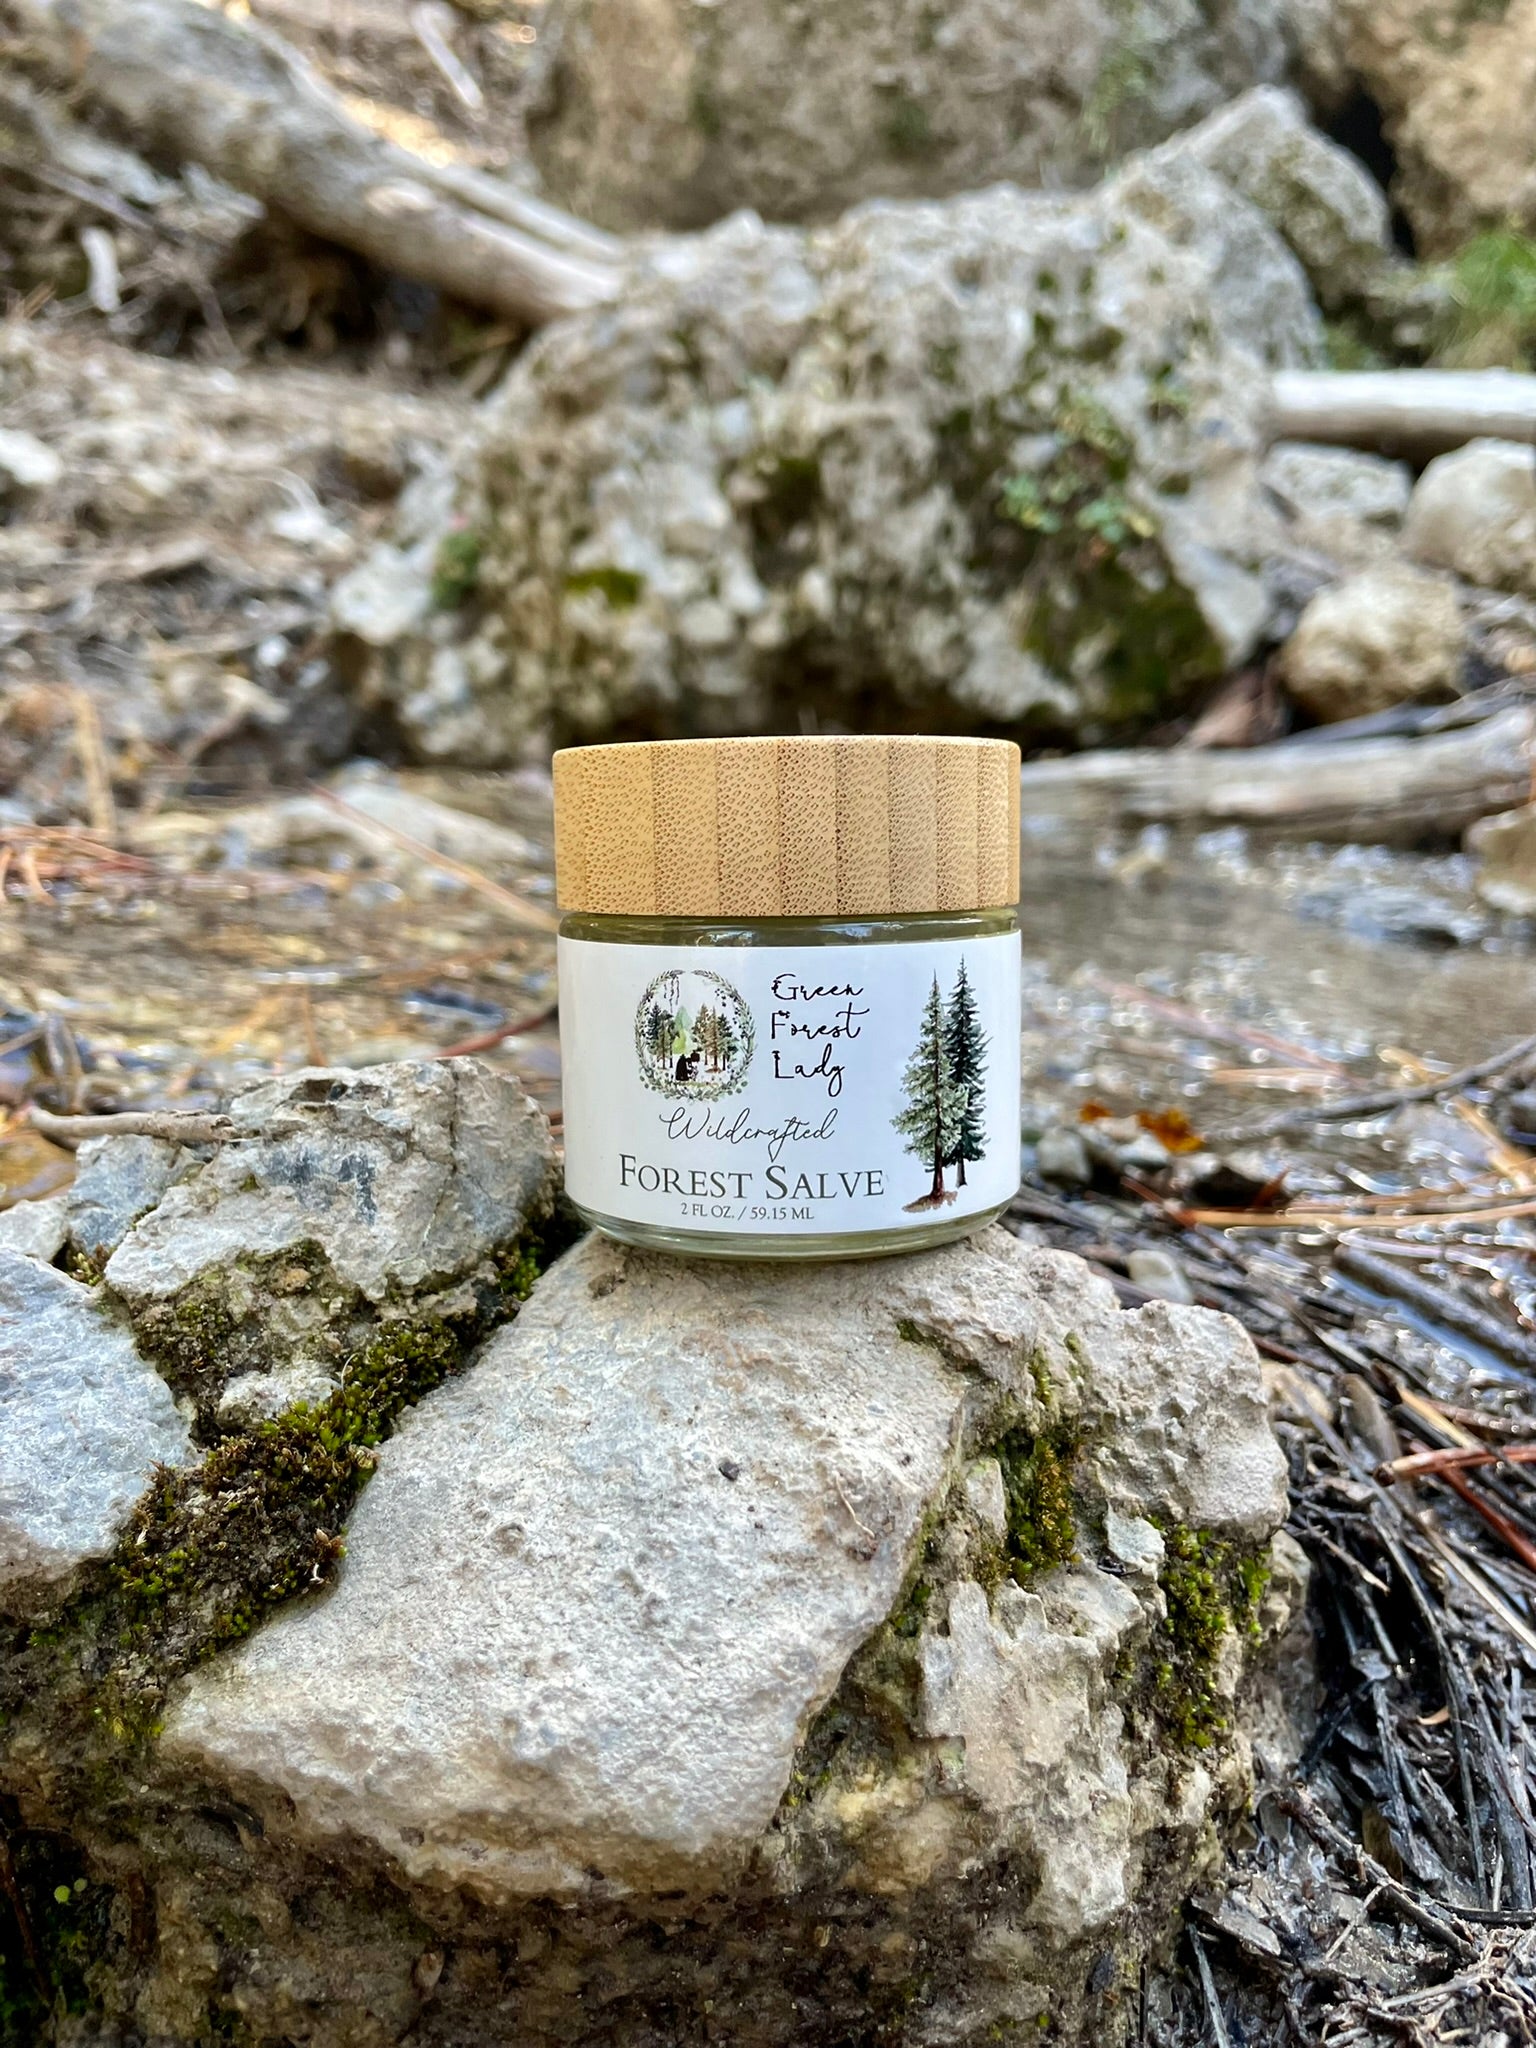 A jar of Forest Salve sitting on a large rock by a stream